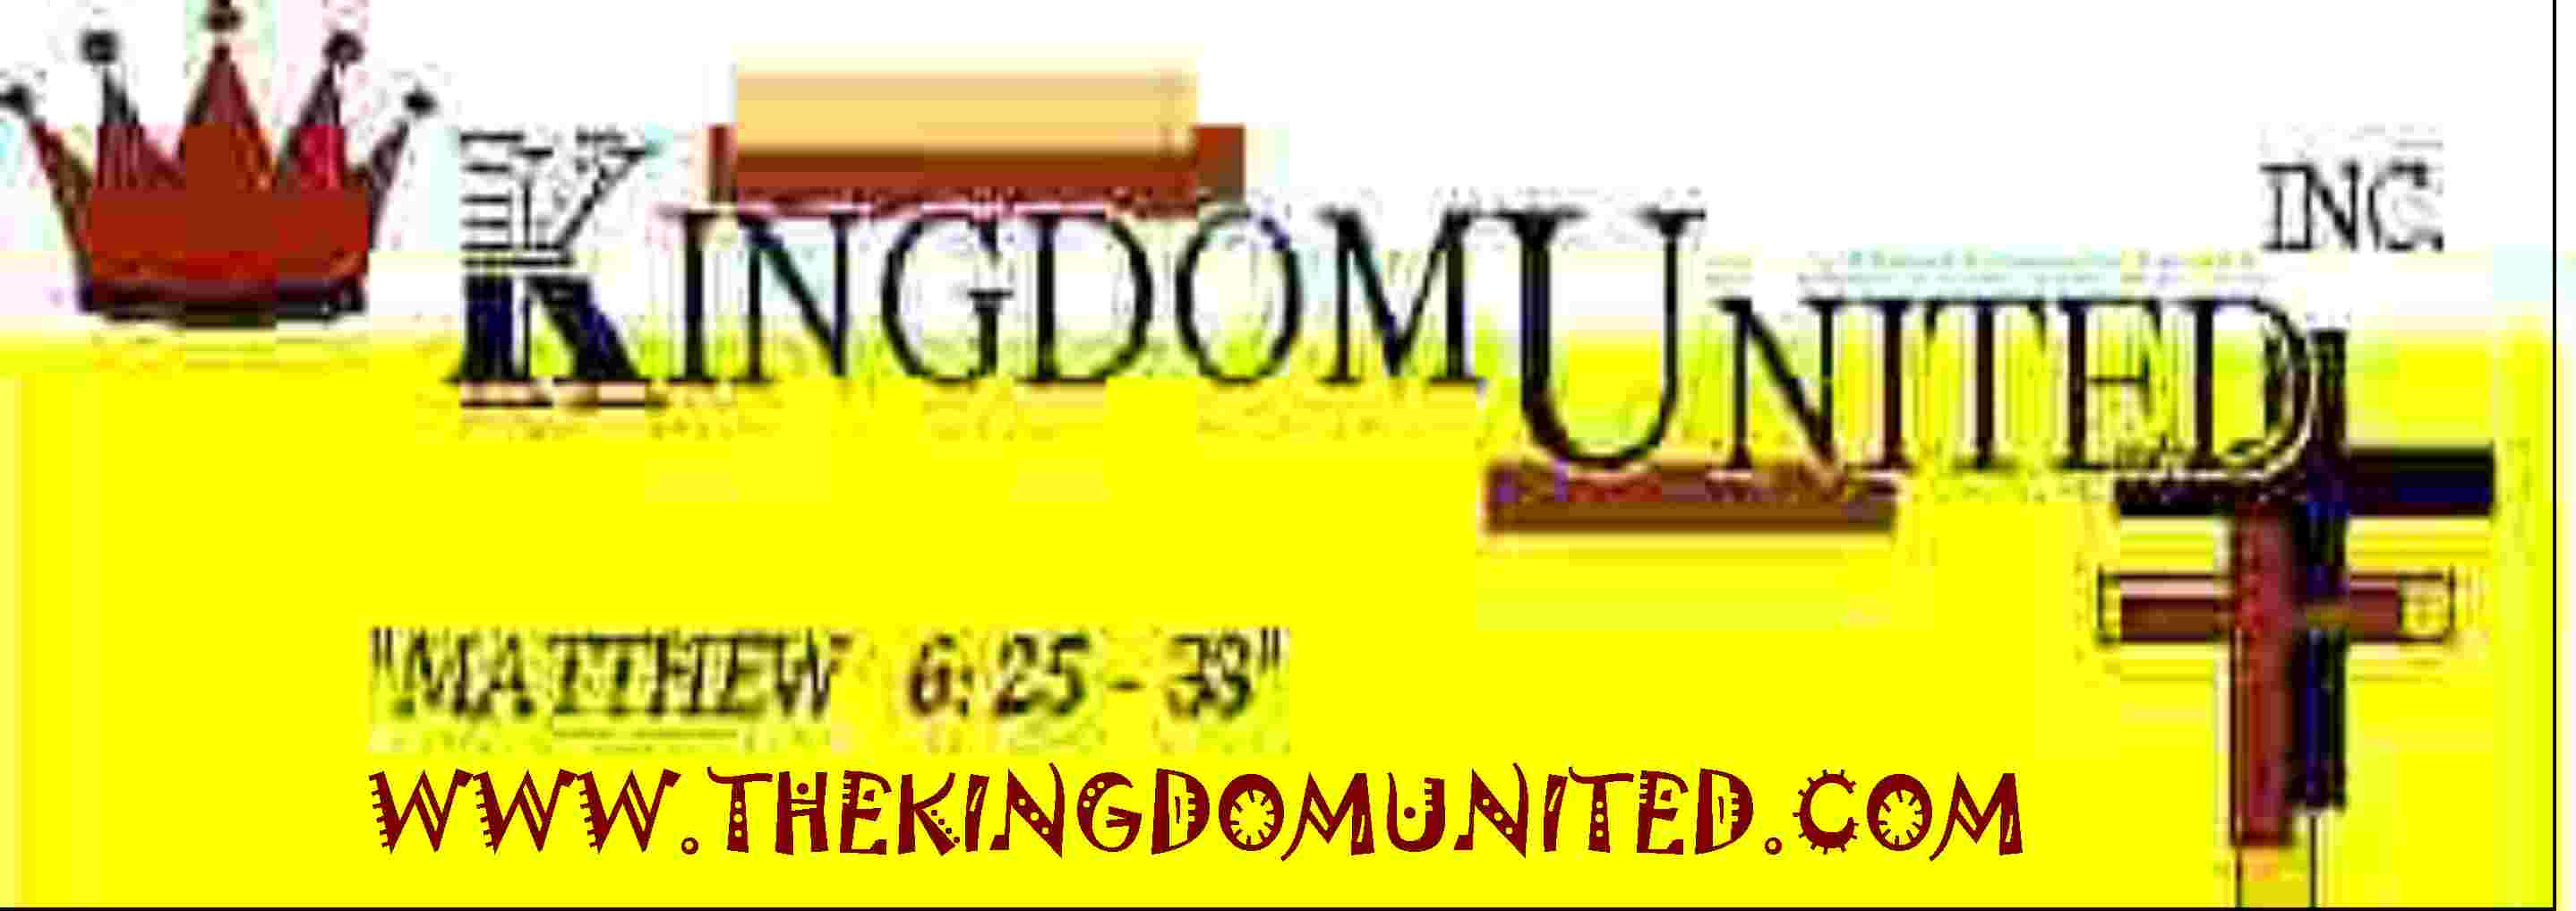 CLICK HERE TO FIND OUT MORE ON THE KINGDOM UNITED